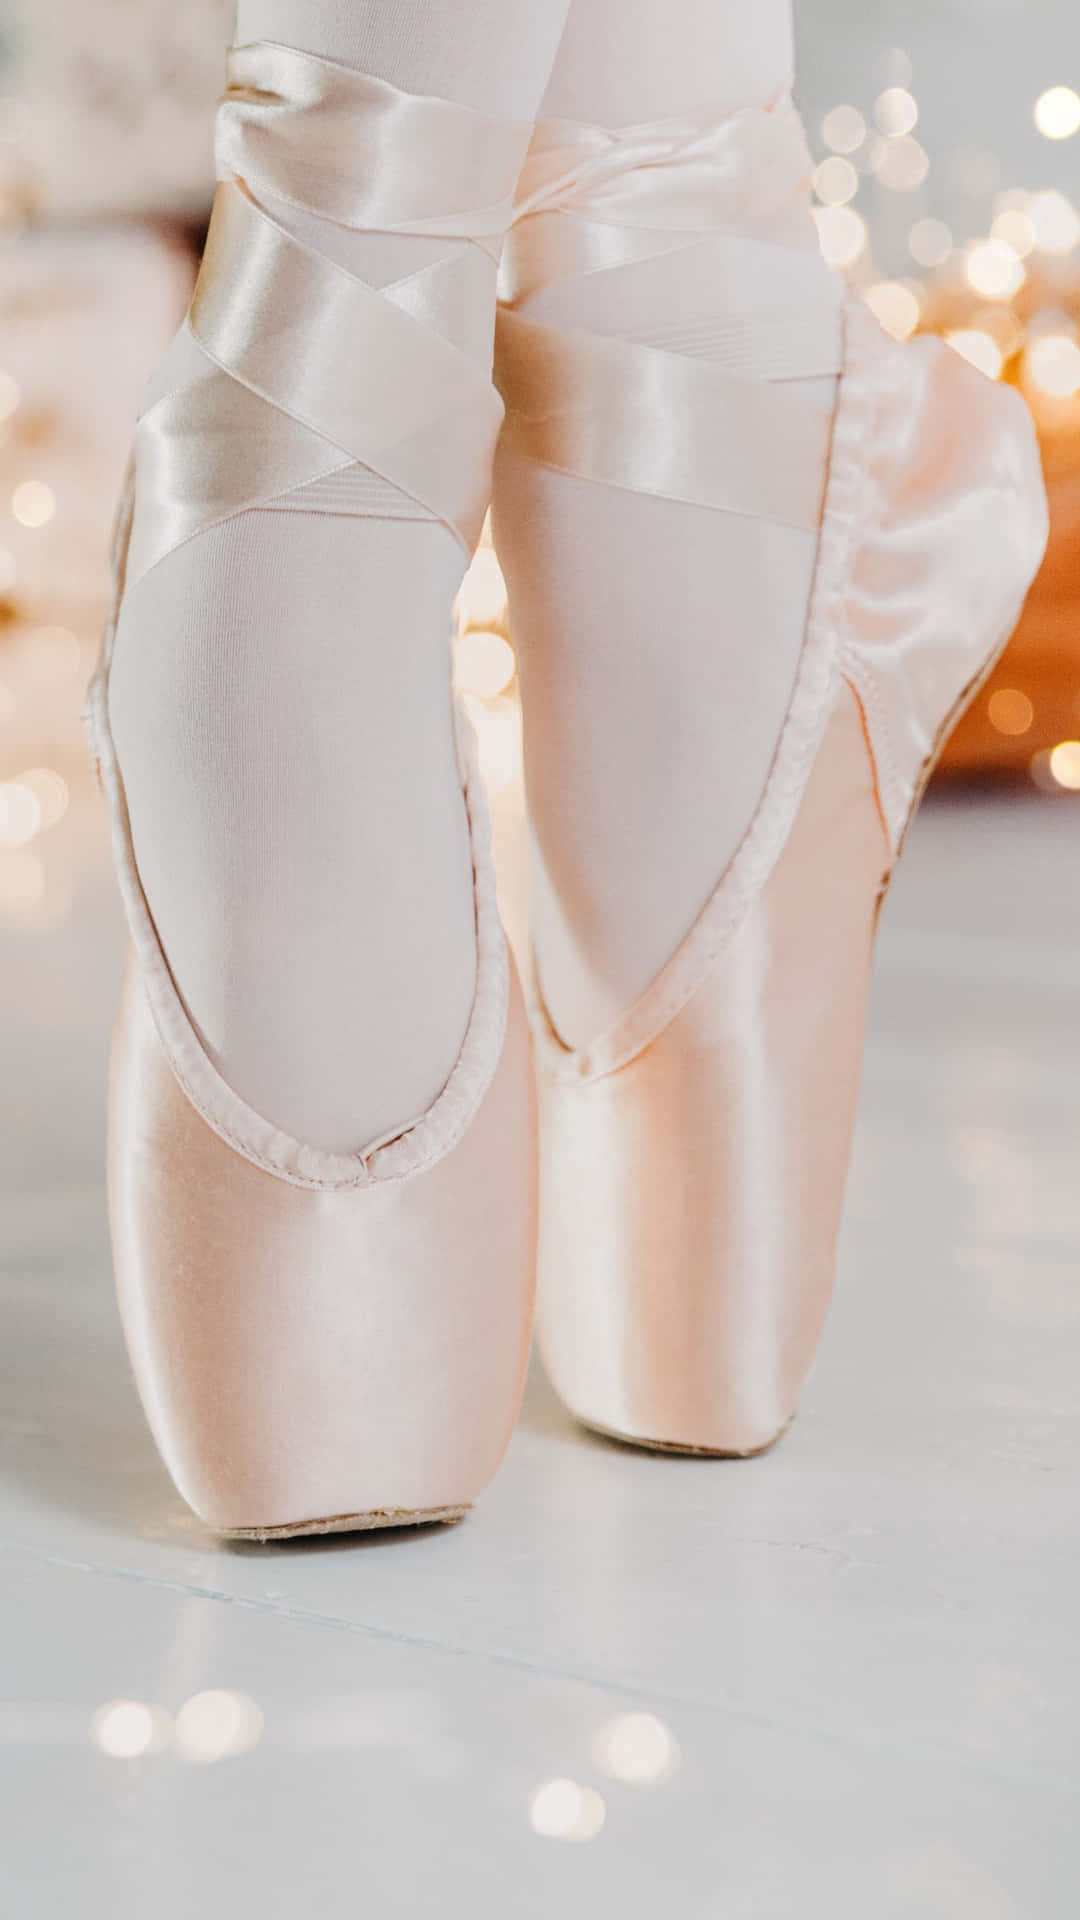 hot pink ballet pointe shoes